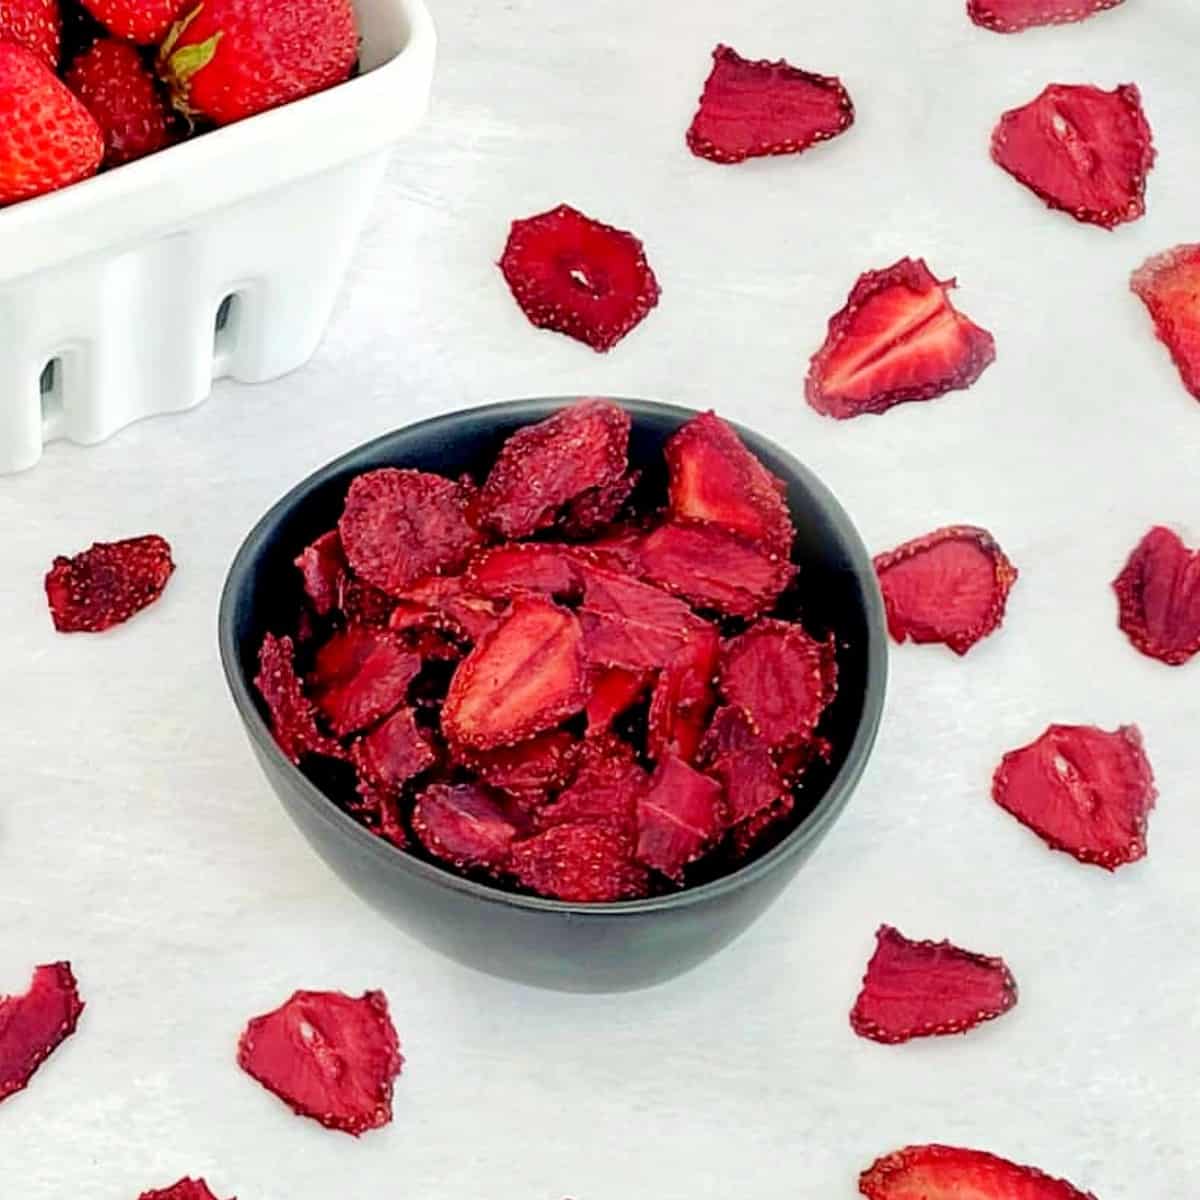 dried strawberries made in a dehydrator